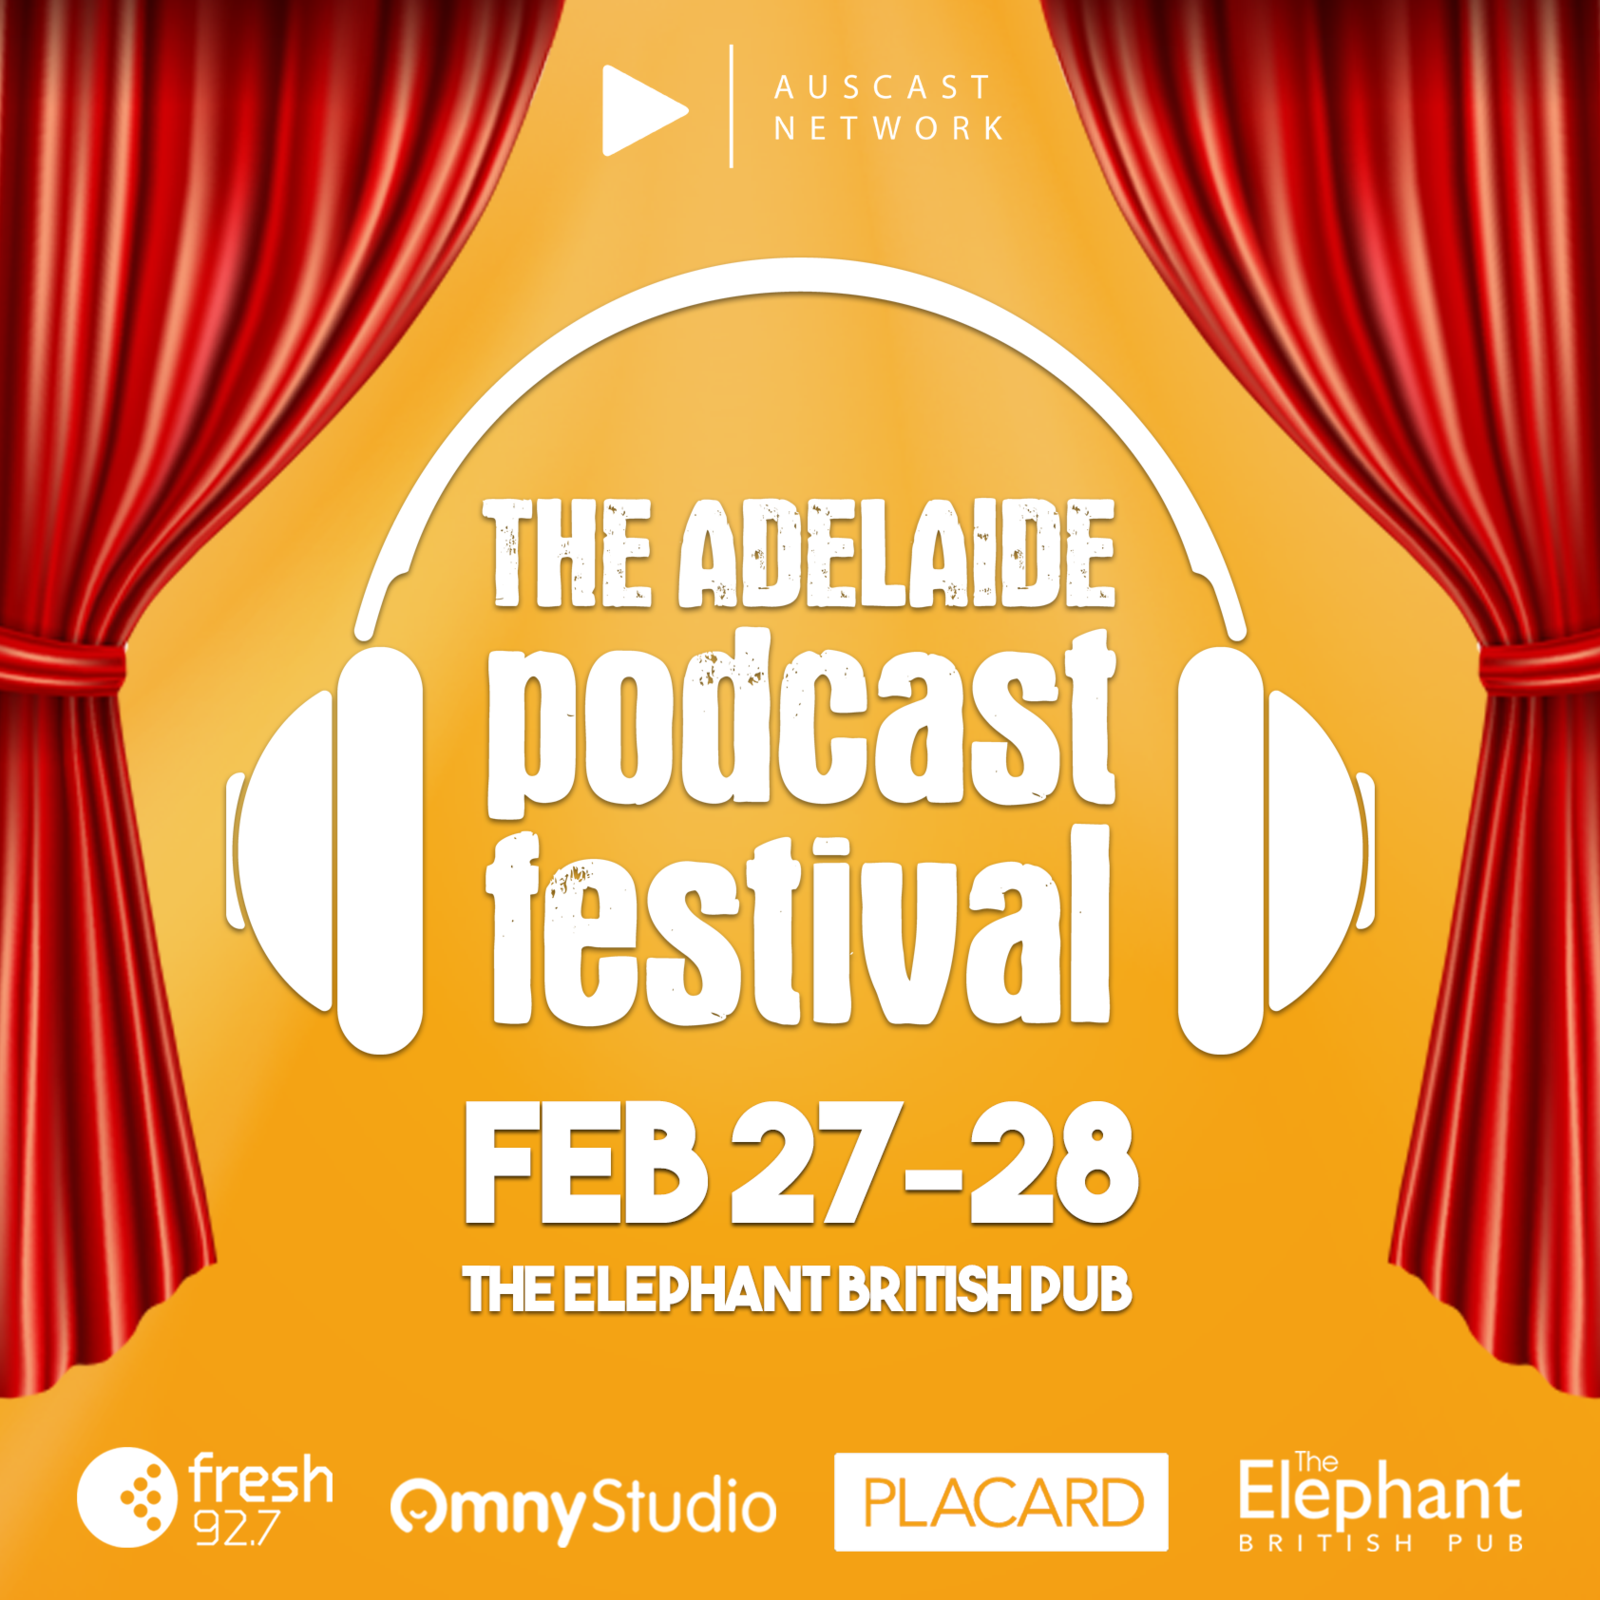 See us live at the Adelaide Podcast Festival!